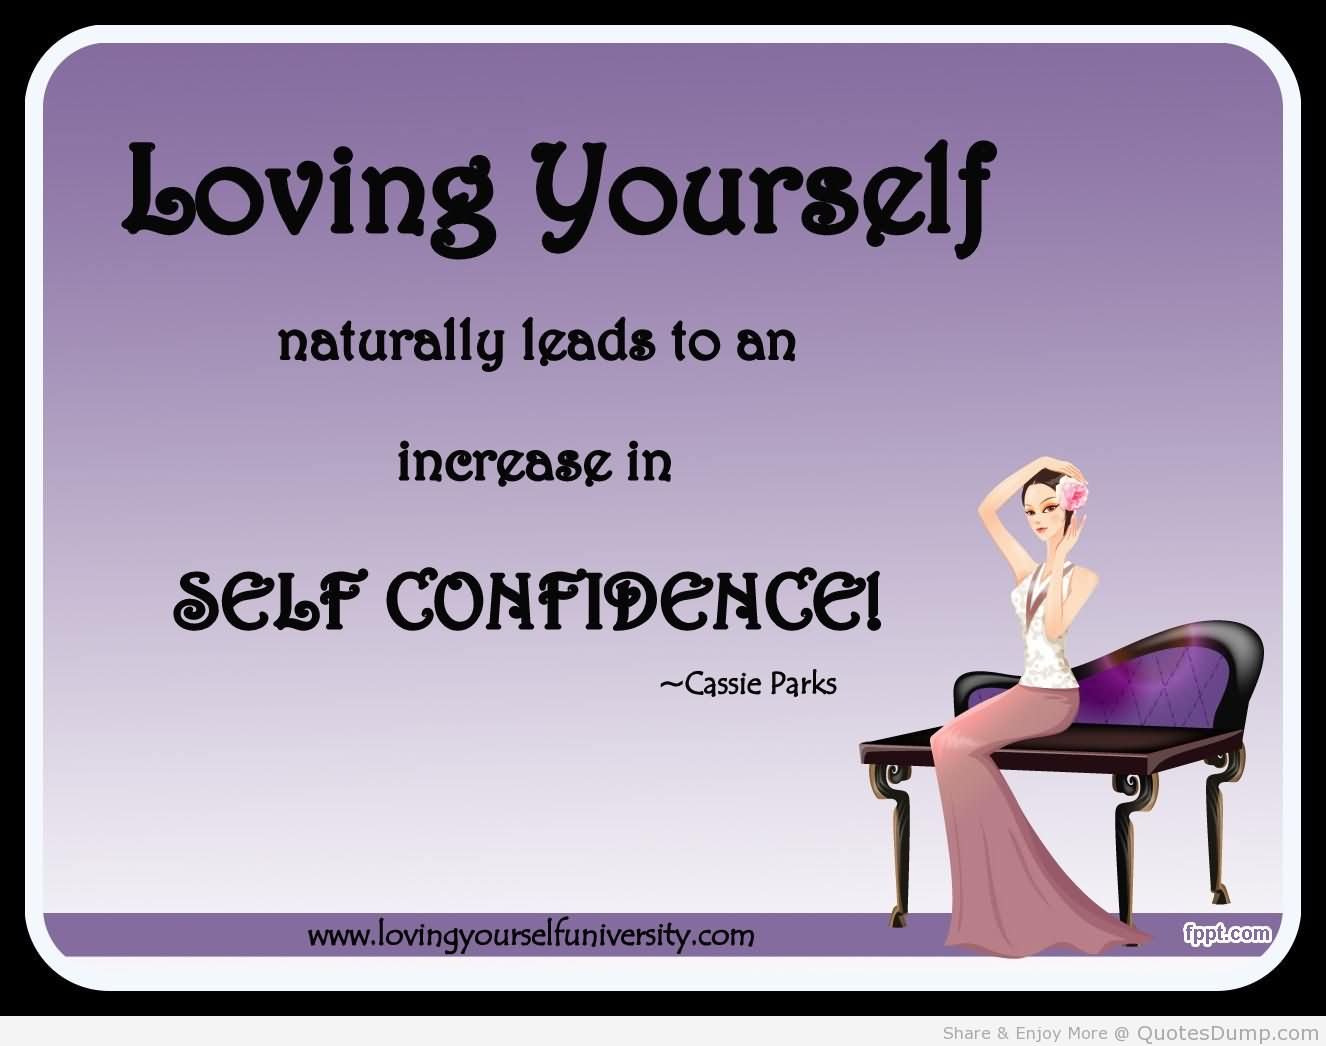 Loving yourself naturally leads to an increase in self confidence.  -  Cassle parks